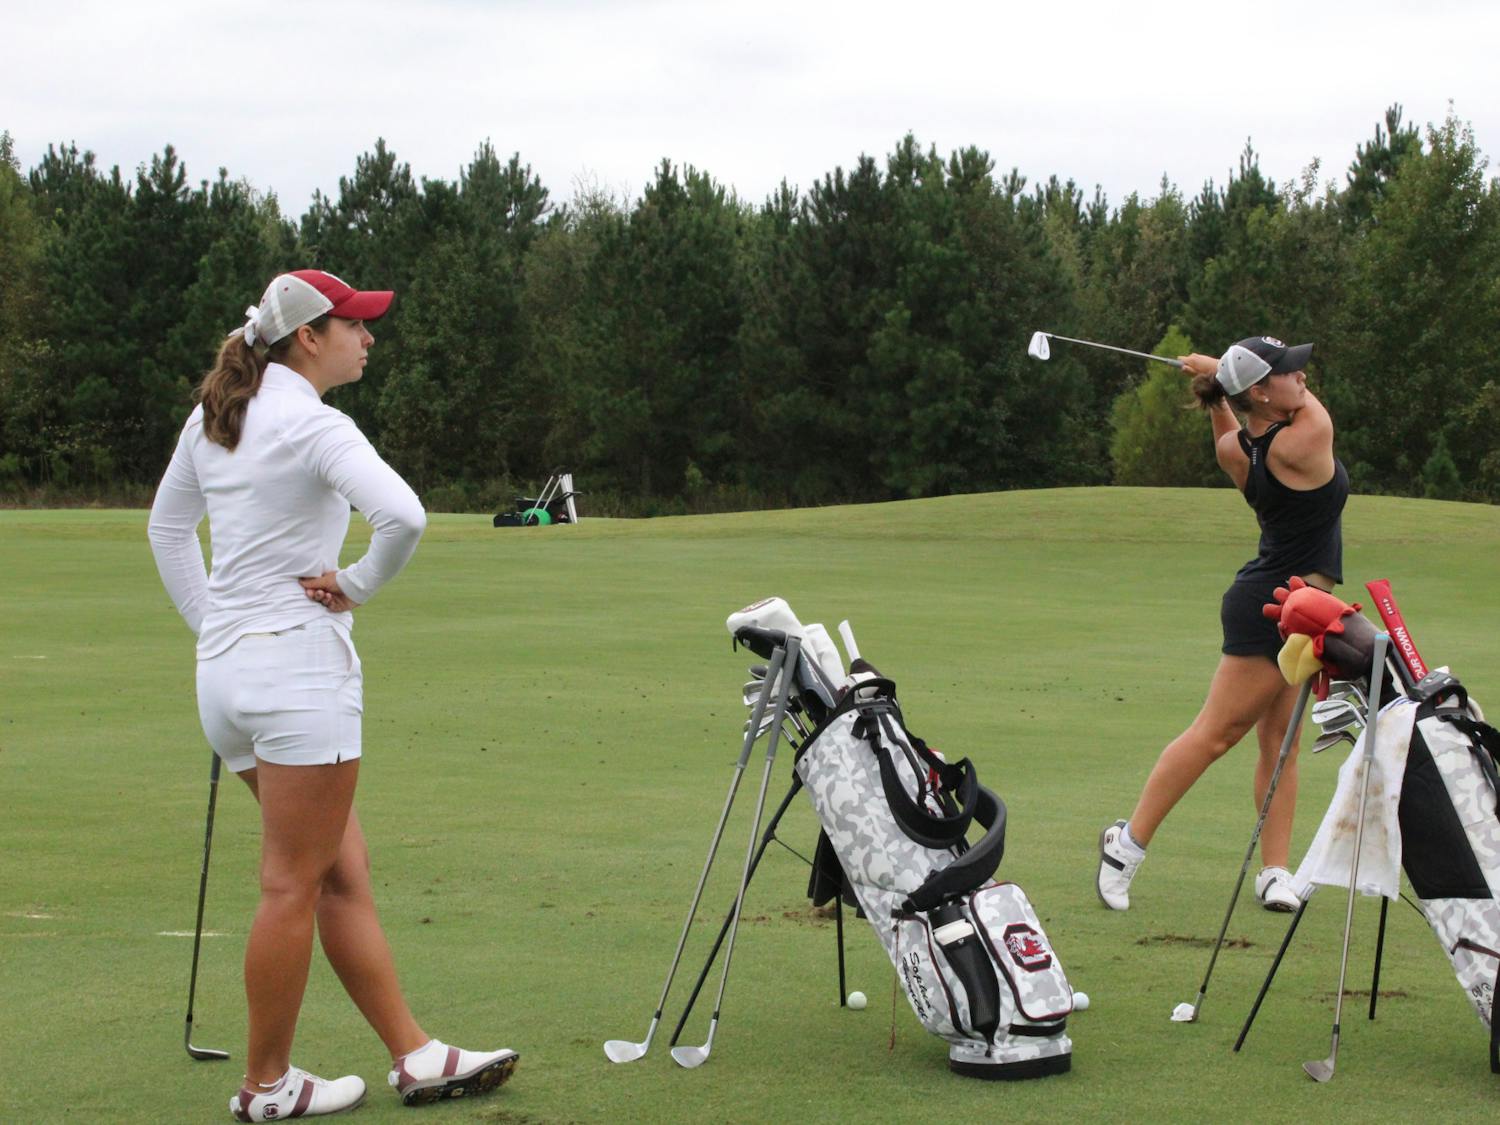 Sophomore Camila Burnett hits a drive while her sister, senior Sophia Burnett, watches on Sept. 28, 2023. The duo said they have enjoyed their sibling rivalry and camaraderie since Camila joined the team in spring 2023.